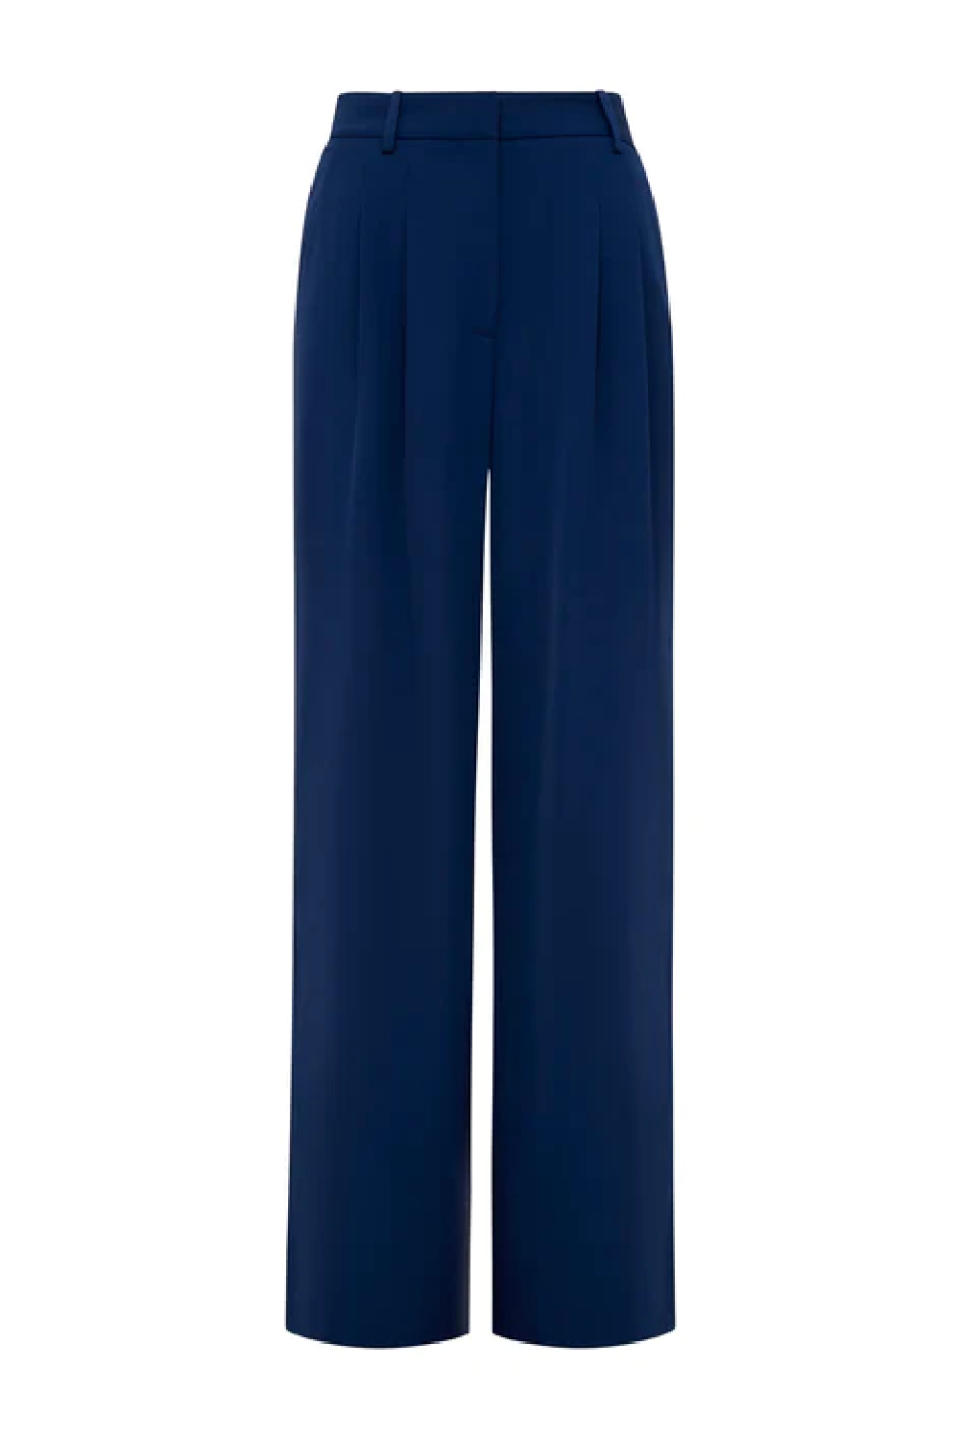 French Connection wide leg trousers